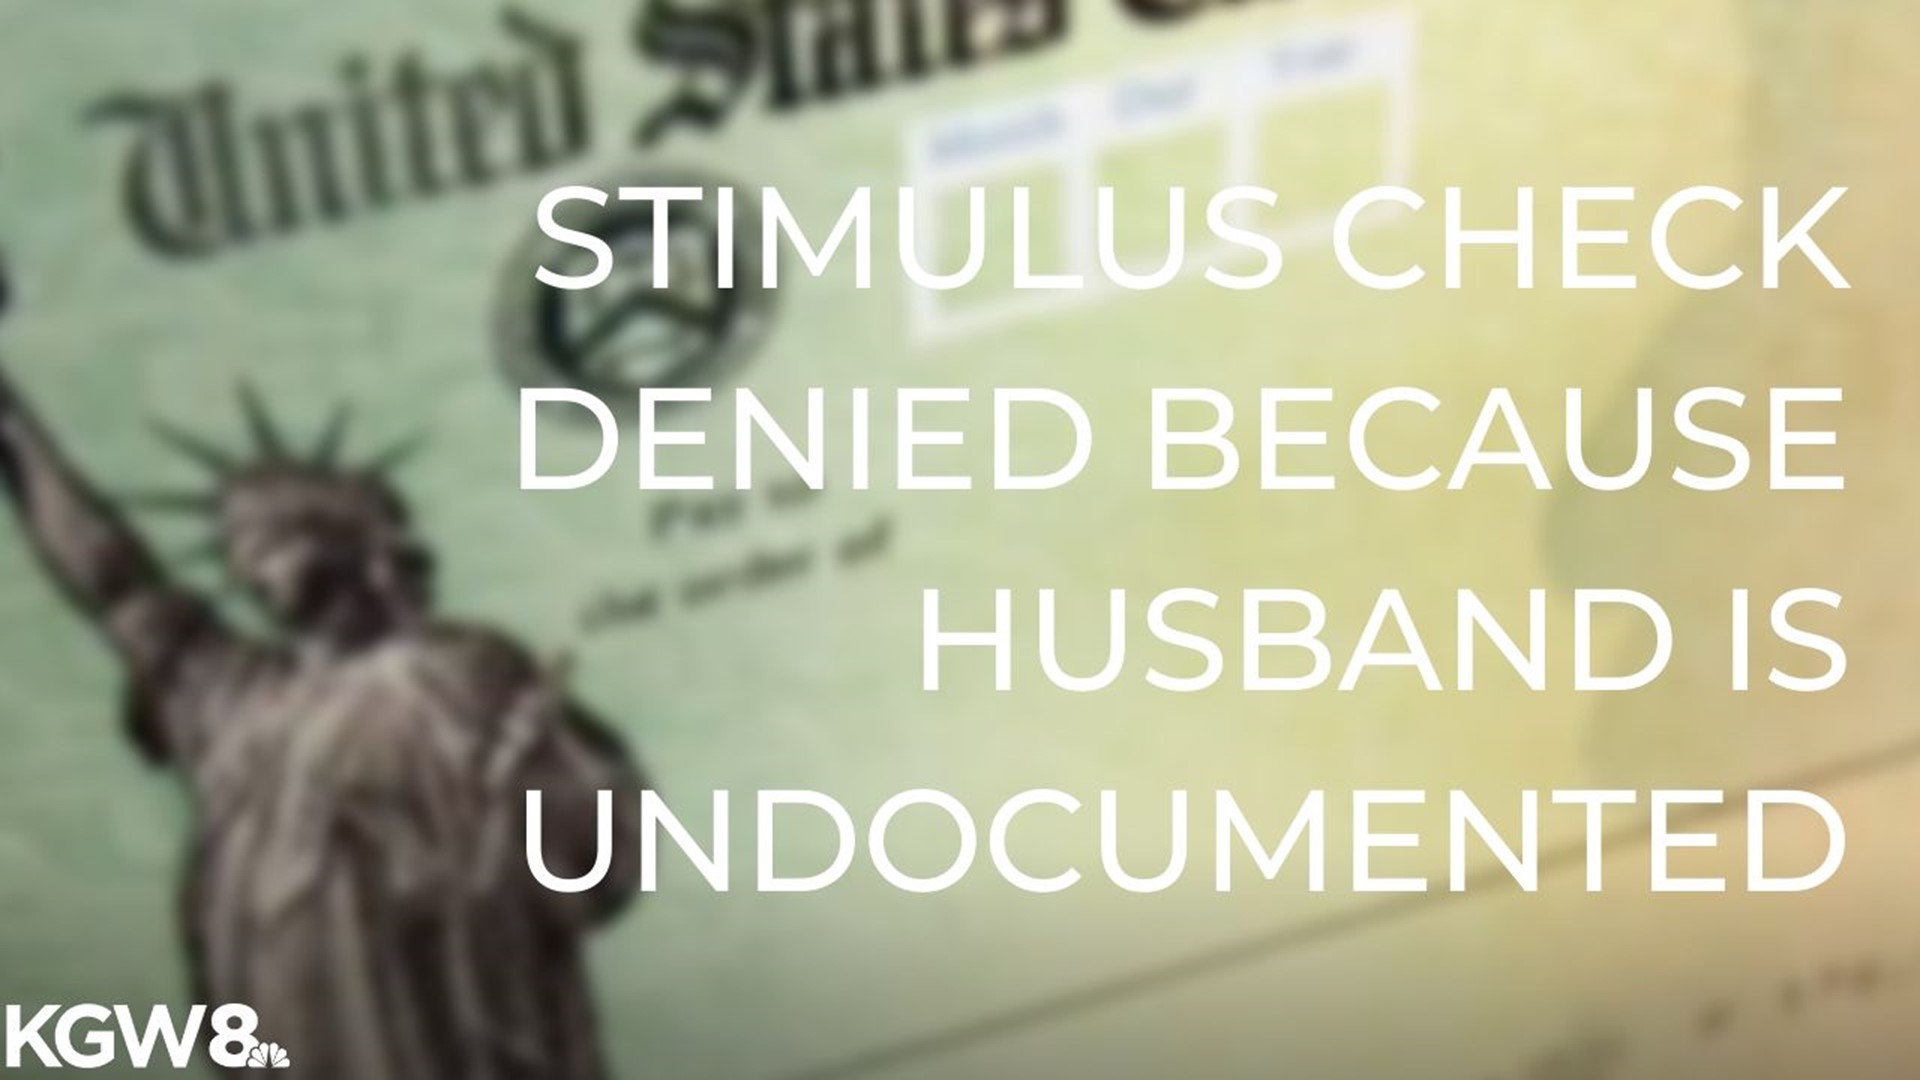 A provision in the coronavirus relief package denies stimulus checks to U.S. citizens married to undocumented immigrants.